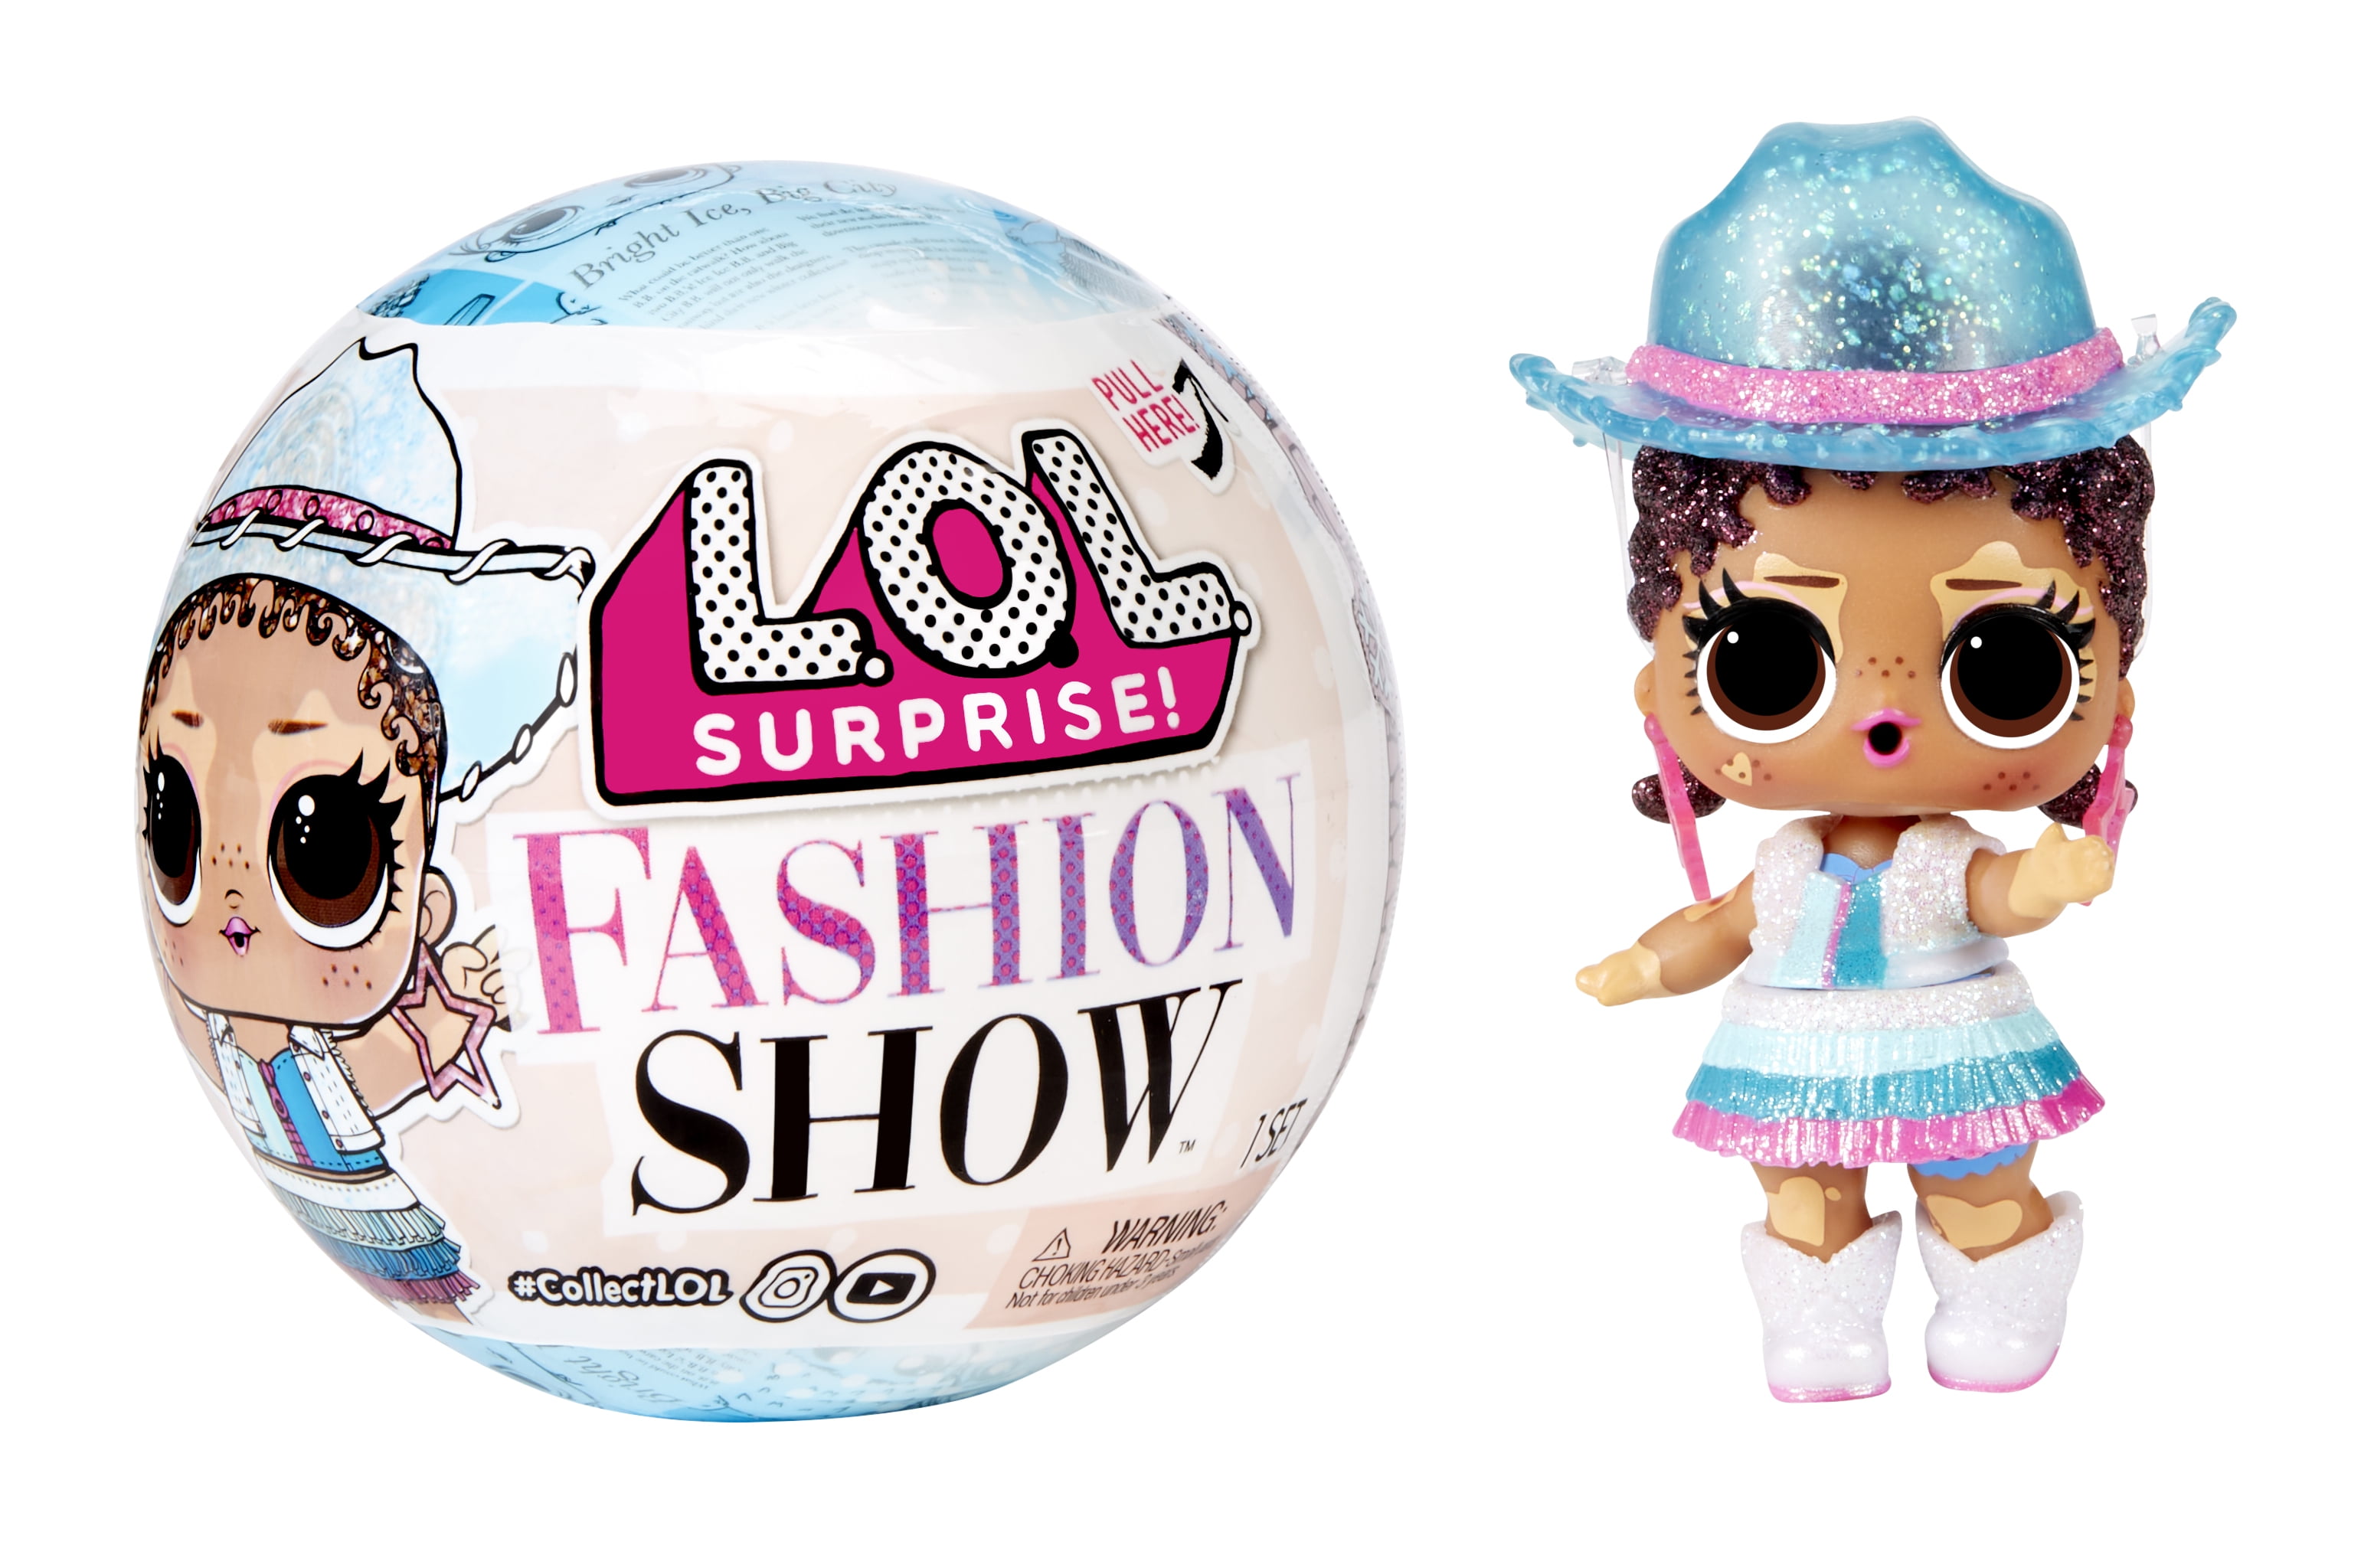 L.O.L. Surprise Fashion Show Dolls in Paper Ball with 8 Surprises, Accessories, Collectible Doll, Paper Packaging, Fashion Theme , Fashion Toy Girls Ages 4 and up